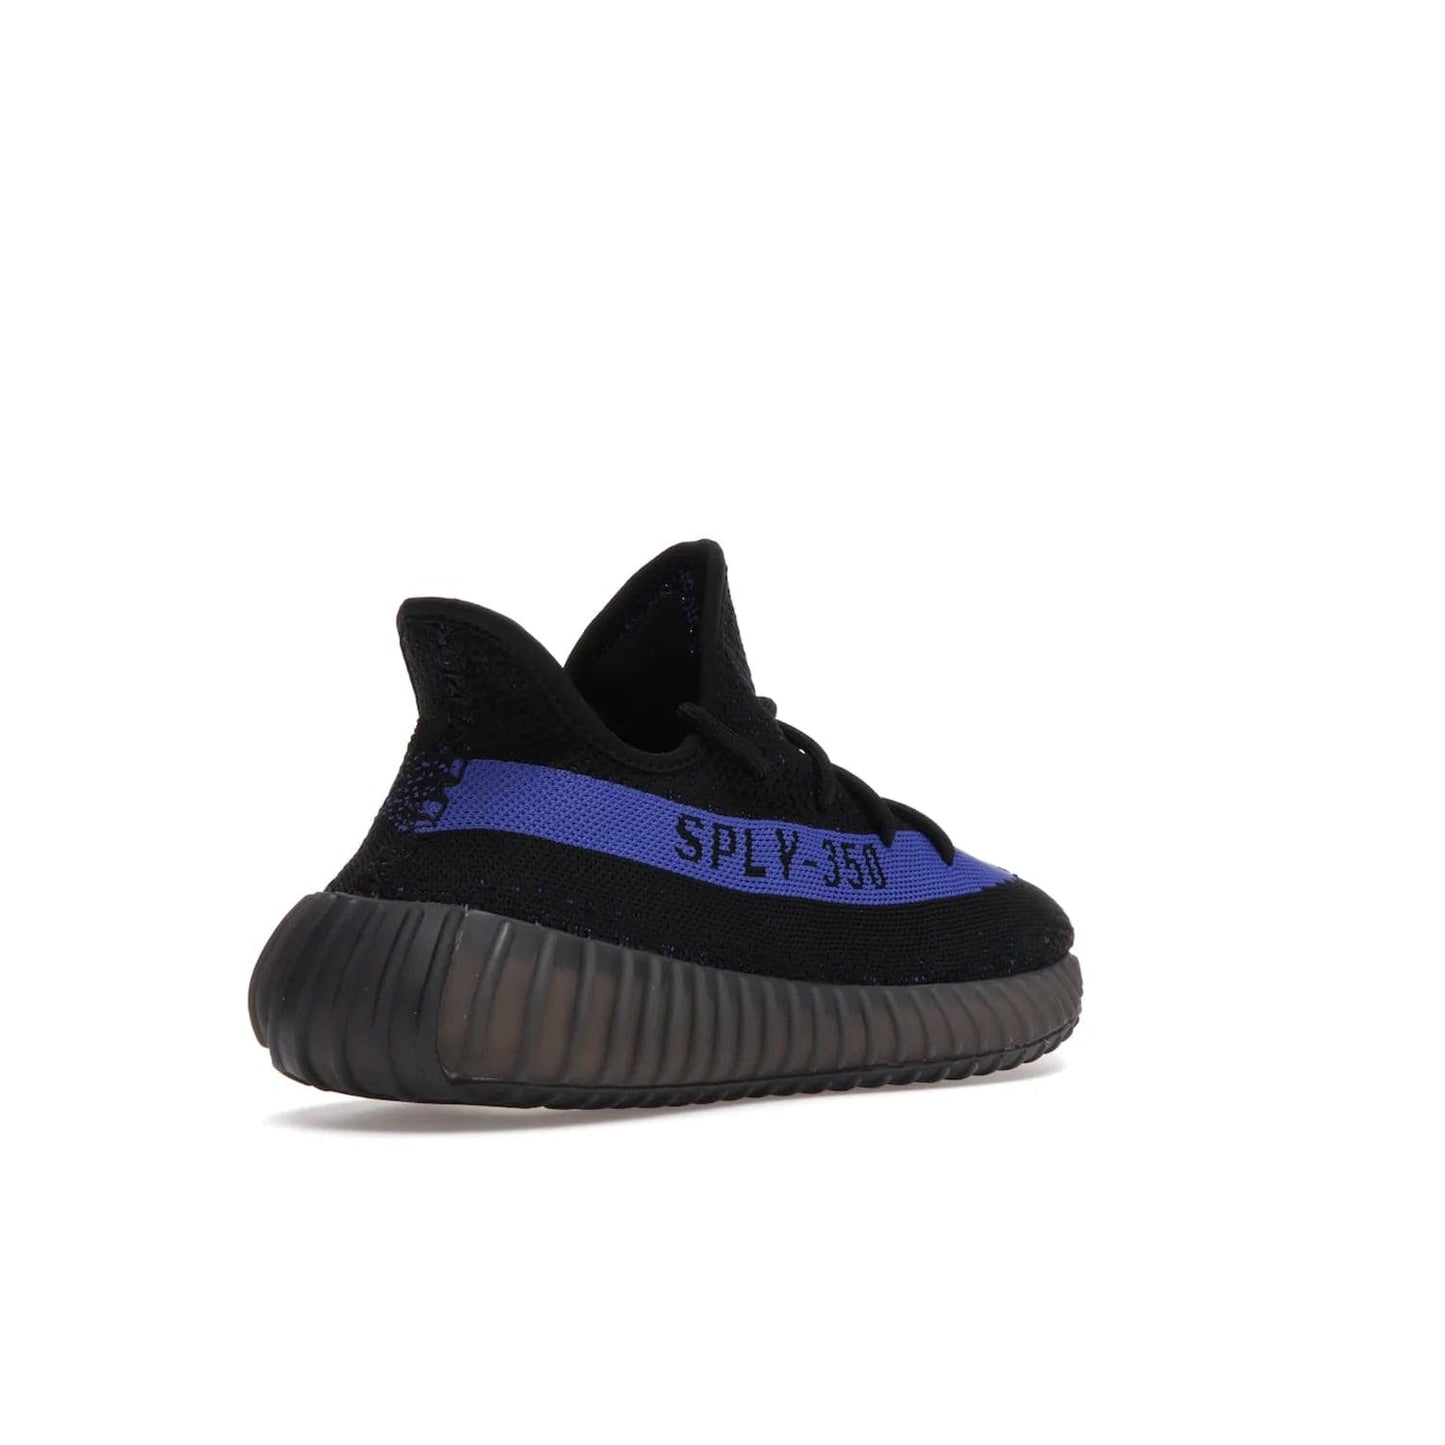 adidas Yeezy Boost 350 V2 Dazzling Blue - Image 32 - Only at www.BallersClubKickz.com - Shop the Adidas Yeezy 350 V2 Dazzling Blue, featuring a solid black Primeknit upper, Dazzling Blue side stripe, “SPLY-350” text, and a muted Boost sole. Releasing Feb 2022, this style is perfect for any shoe fan.